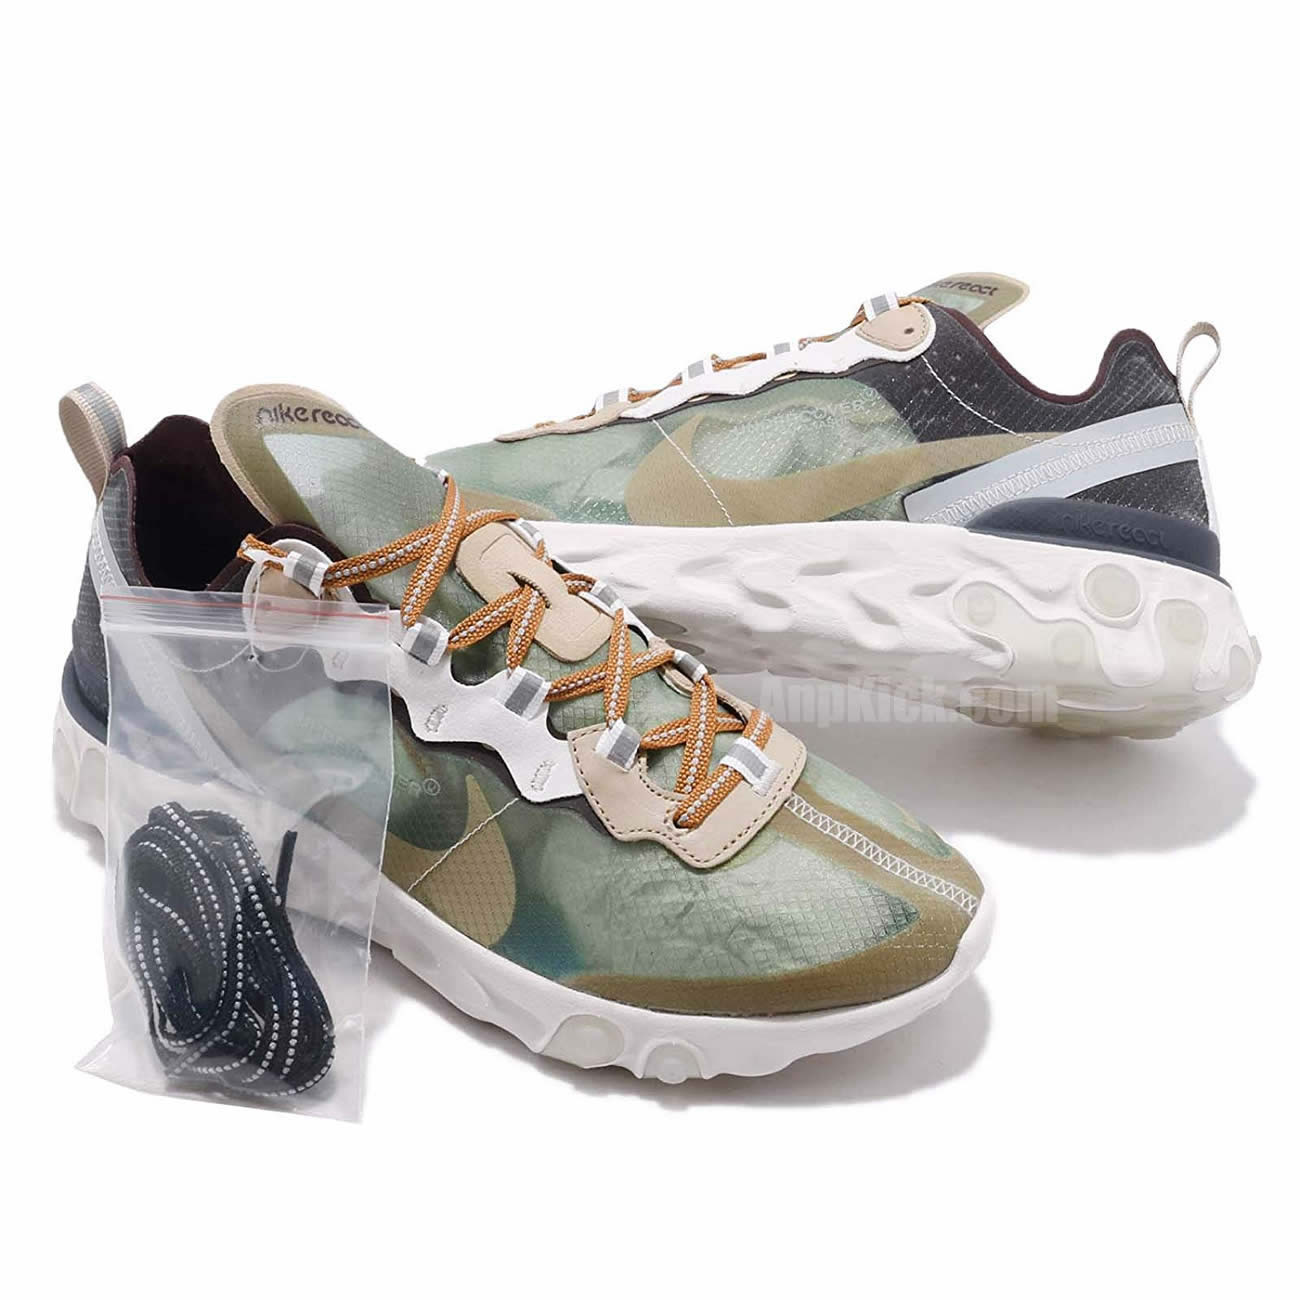 Undercover x Nike React Element 87 'Green Mist' Shoes Collection BQ2718-300